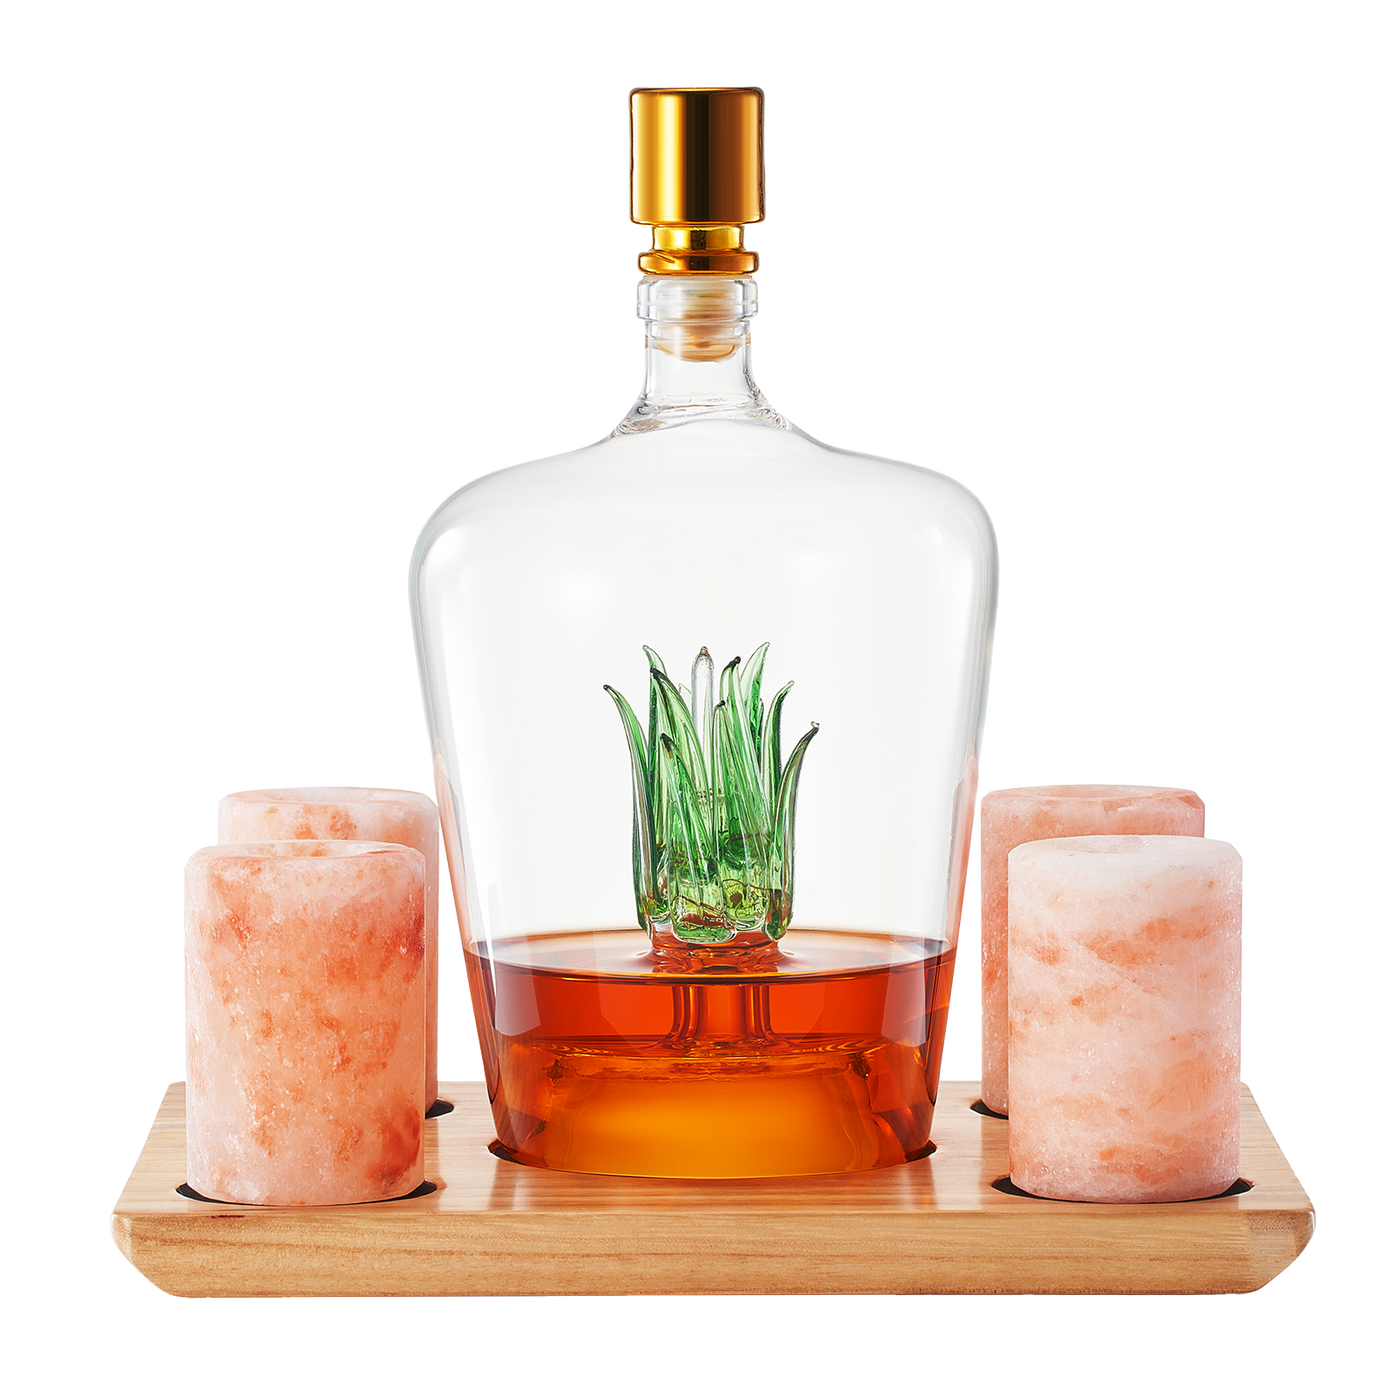 Tequila Decanter With Four Pink Himalayan Salt Shot Glasses Set, Perfect for Tequila Agave Liquor Lovers, 34 OZ Bottle, 1.6 OZ Shot Glass, Tequila, Liquor Party Decorations Cinco De Mayo (Agave)